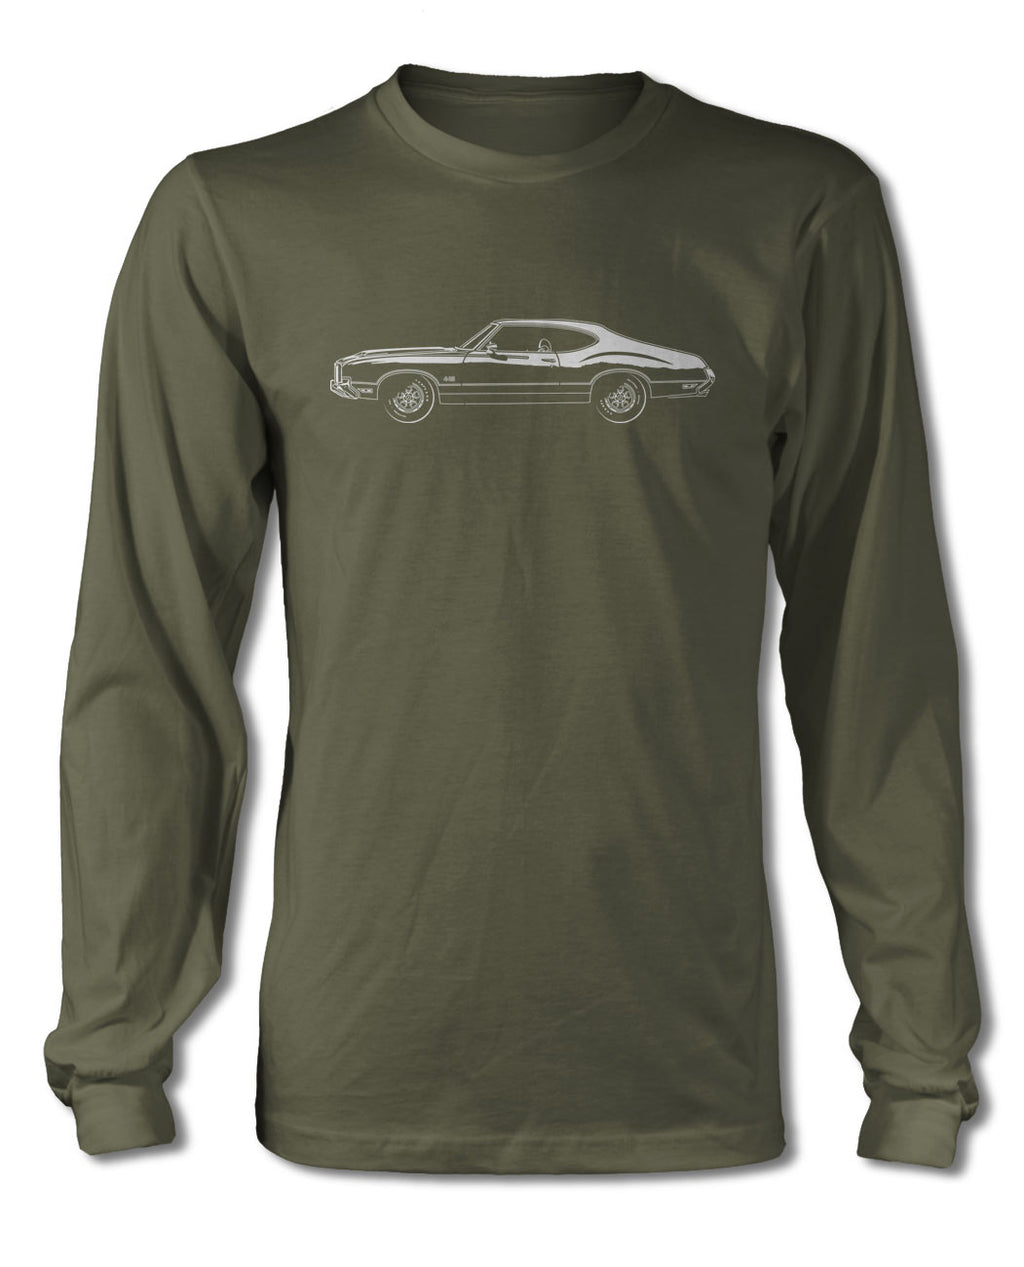 1972 Oldsmobile Cutlass 4-4-2 Coupe T-Shirt - Long Sleeves - Side View